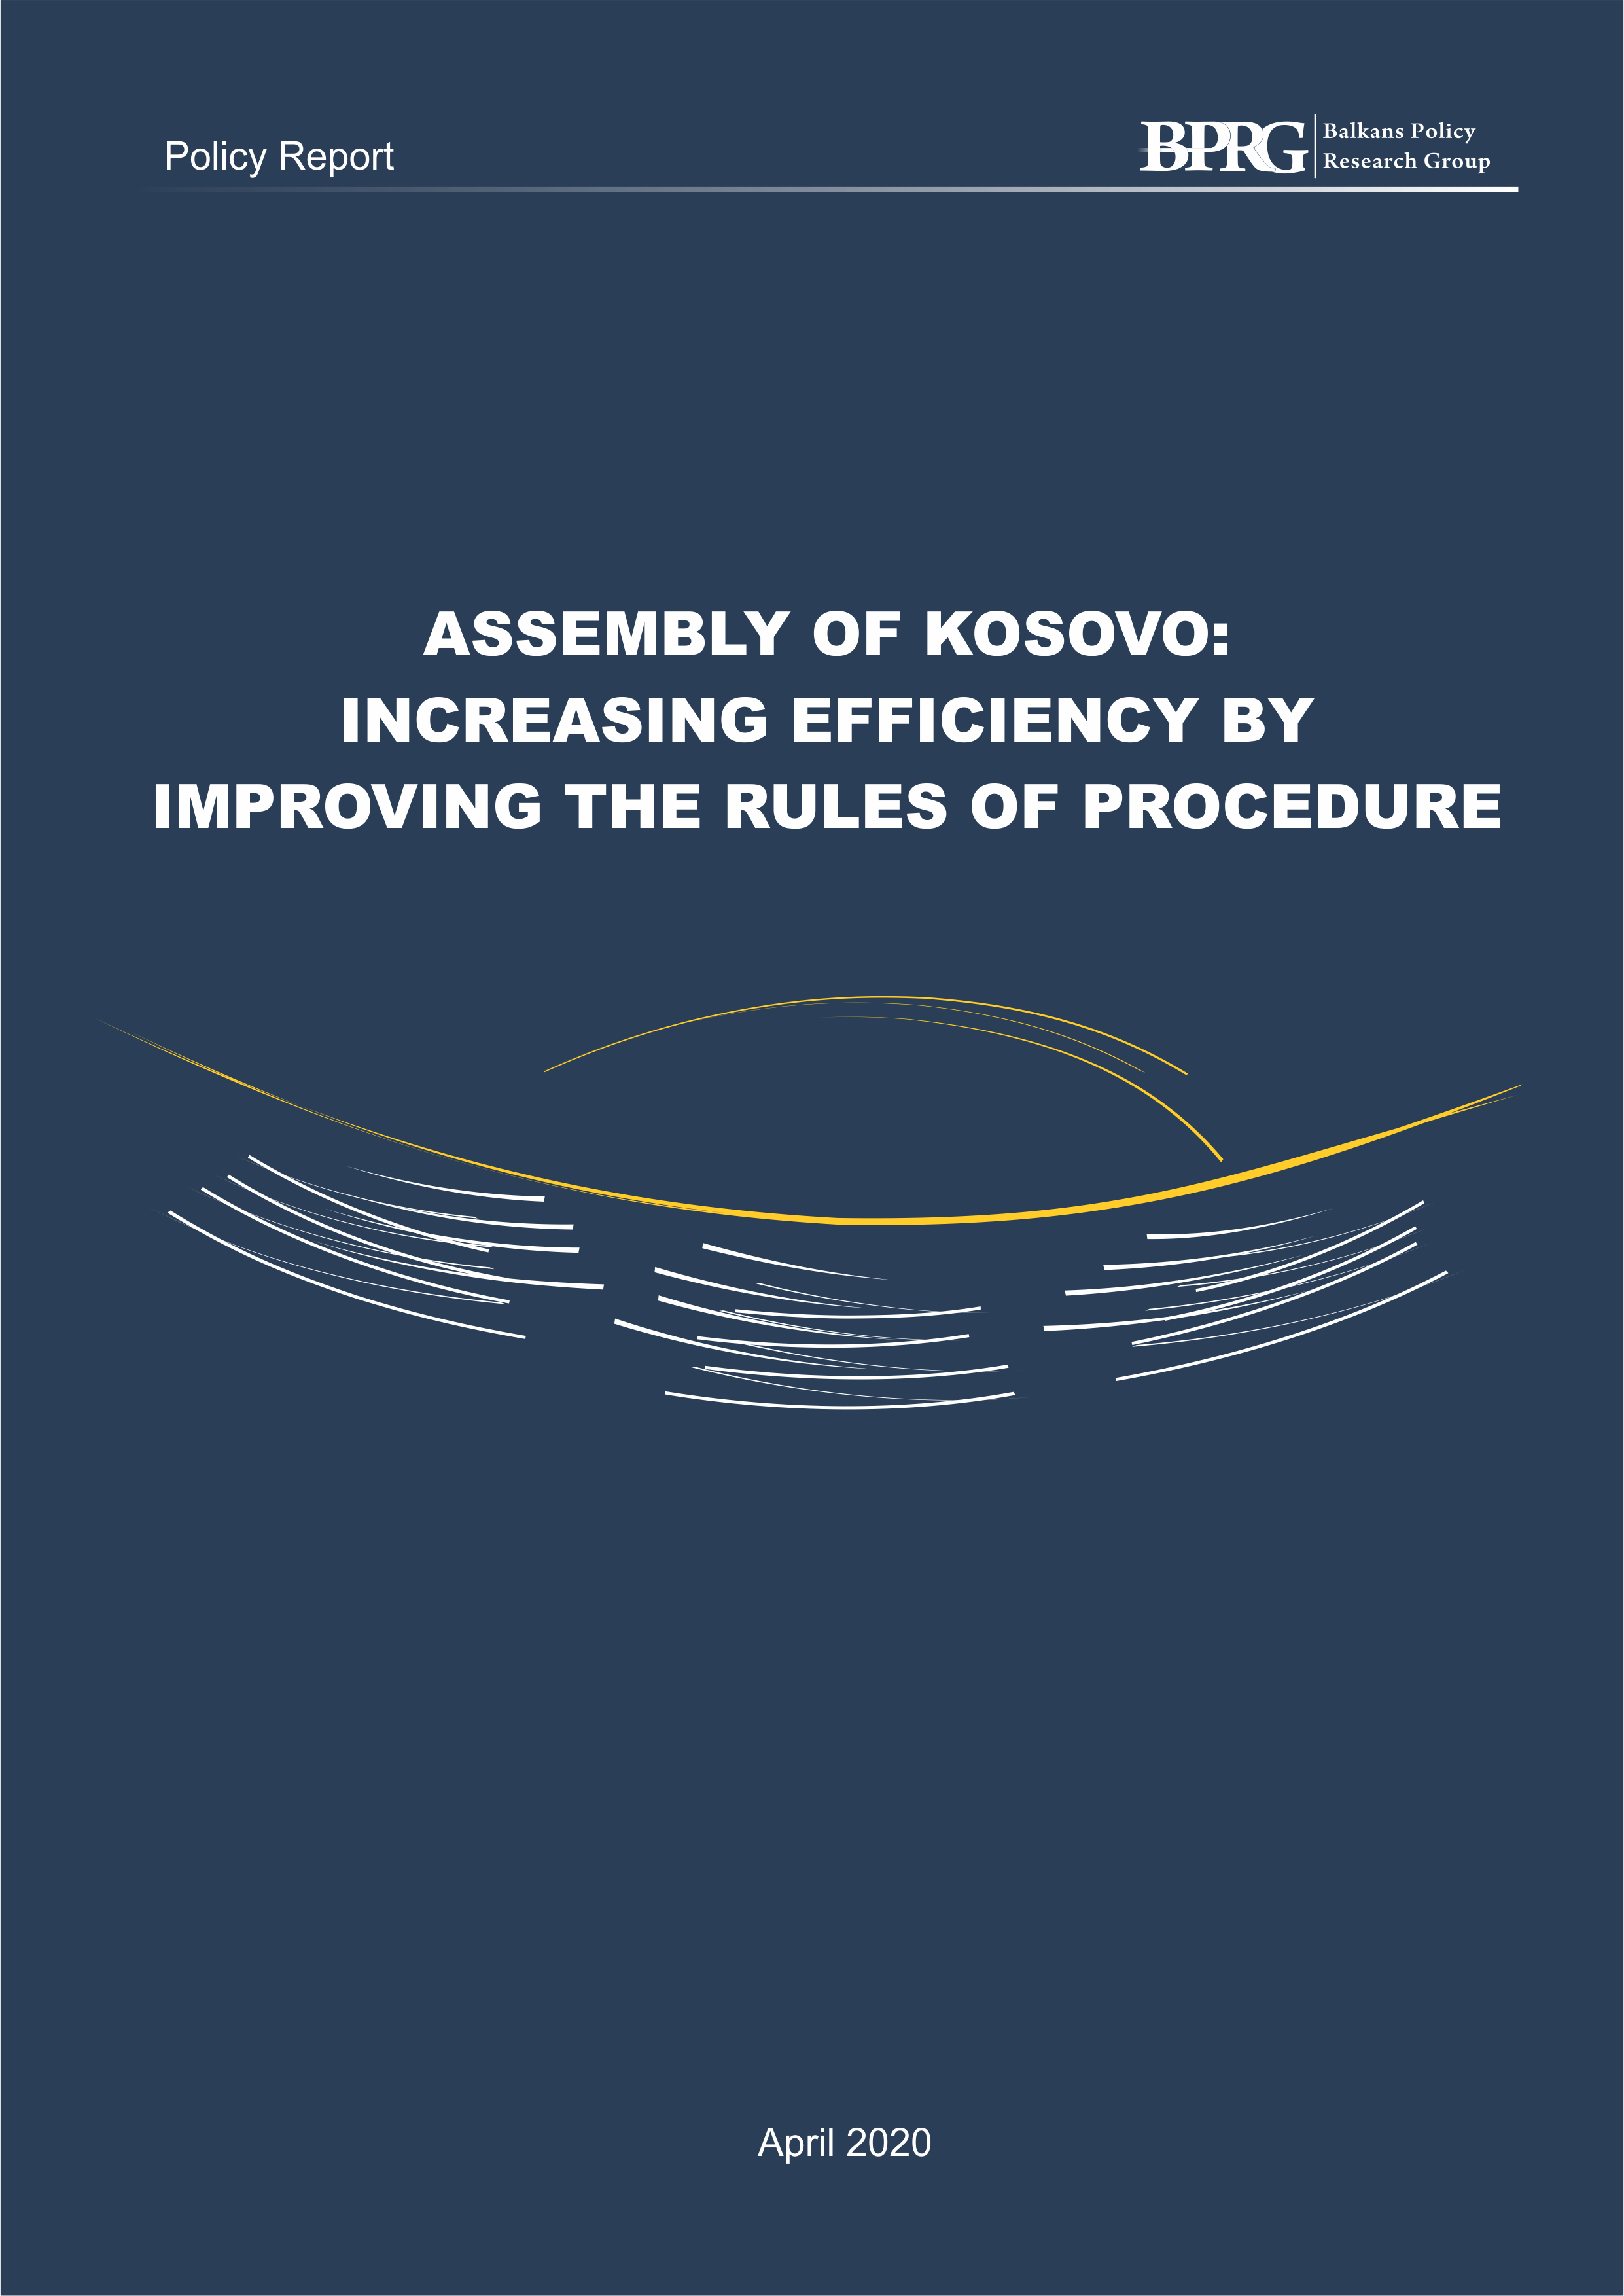 Assembly of Kosovo: Increasing Effectiveness by Improving the Rules of Procedure